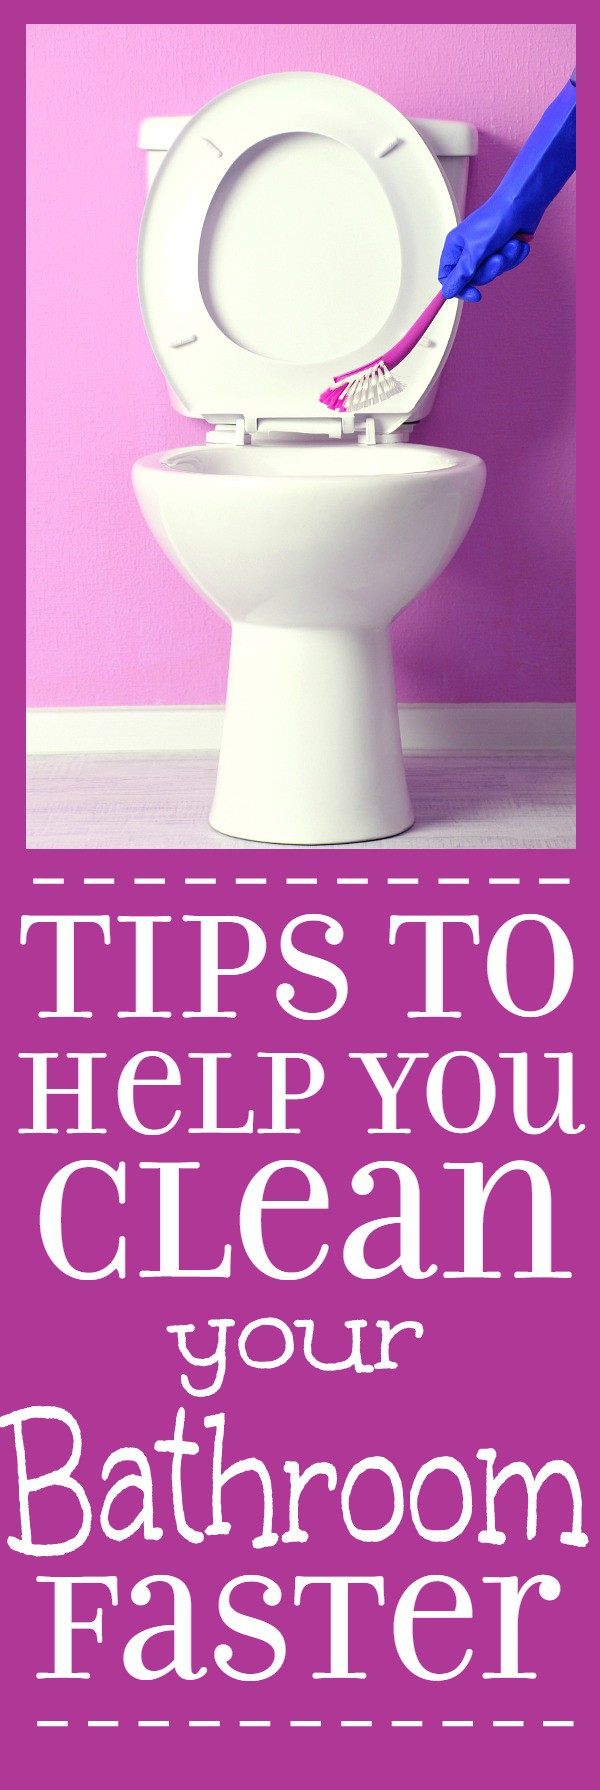 Tips to Help You Clean Your Bathroom Faster - Cleaning the bathroom is probably the most dreaded household chore. But it needs to be done, not just to keep your bathrooms looking nice, but to keep them safe and germ free. However, just because it needs to be done doesn't mean it has to take forever! Take a look at these 5 Tips to Help You Clean Your Bathroom Faster! Yes, please! Anything to make cleaning the bathroom easier!